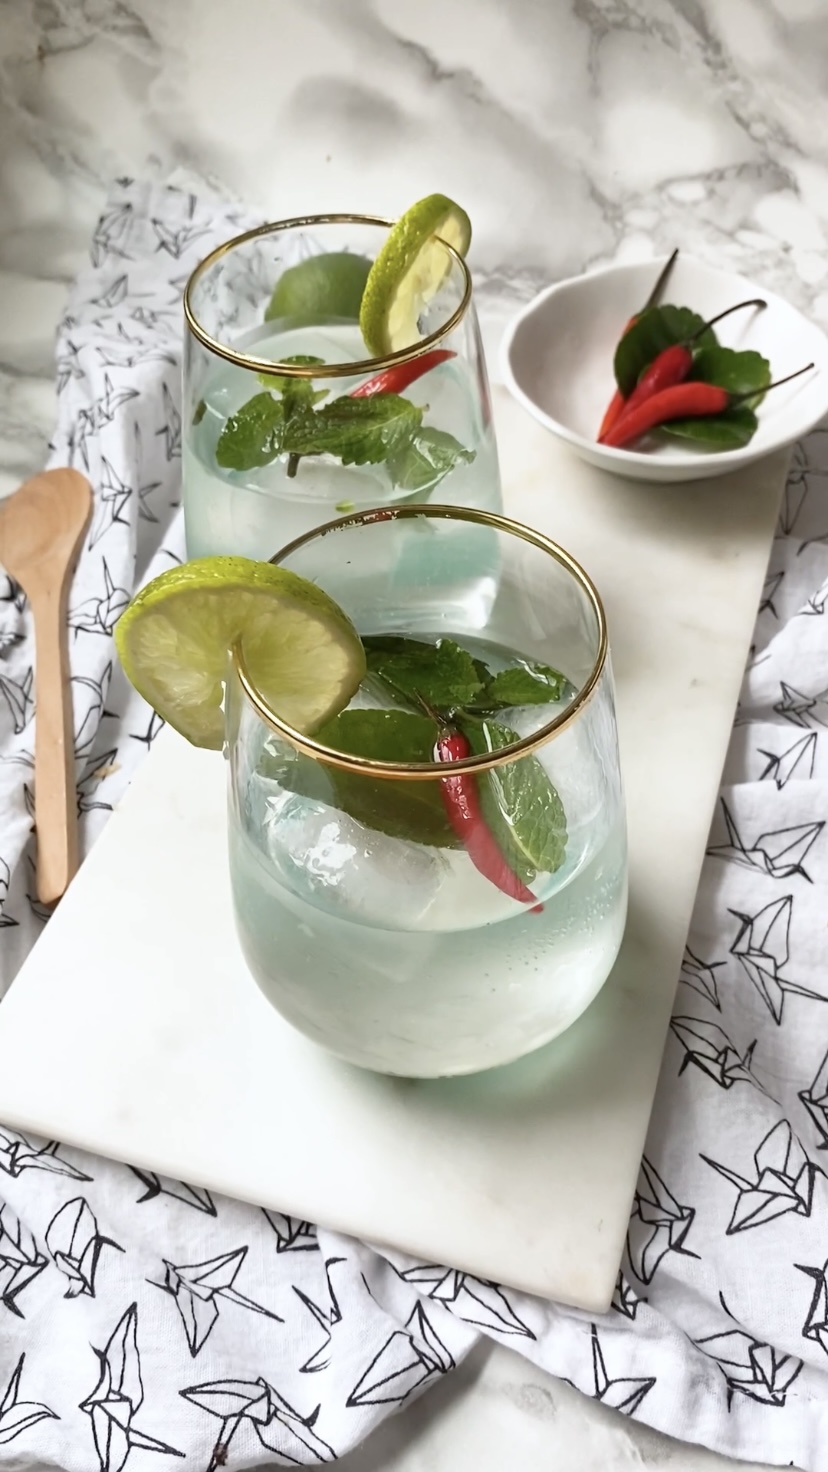 Two cocktails garnished with Thai leaves and chilies on a marble background.